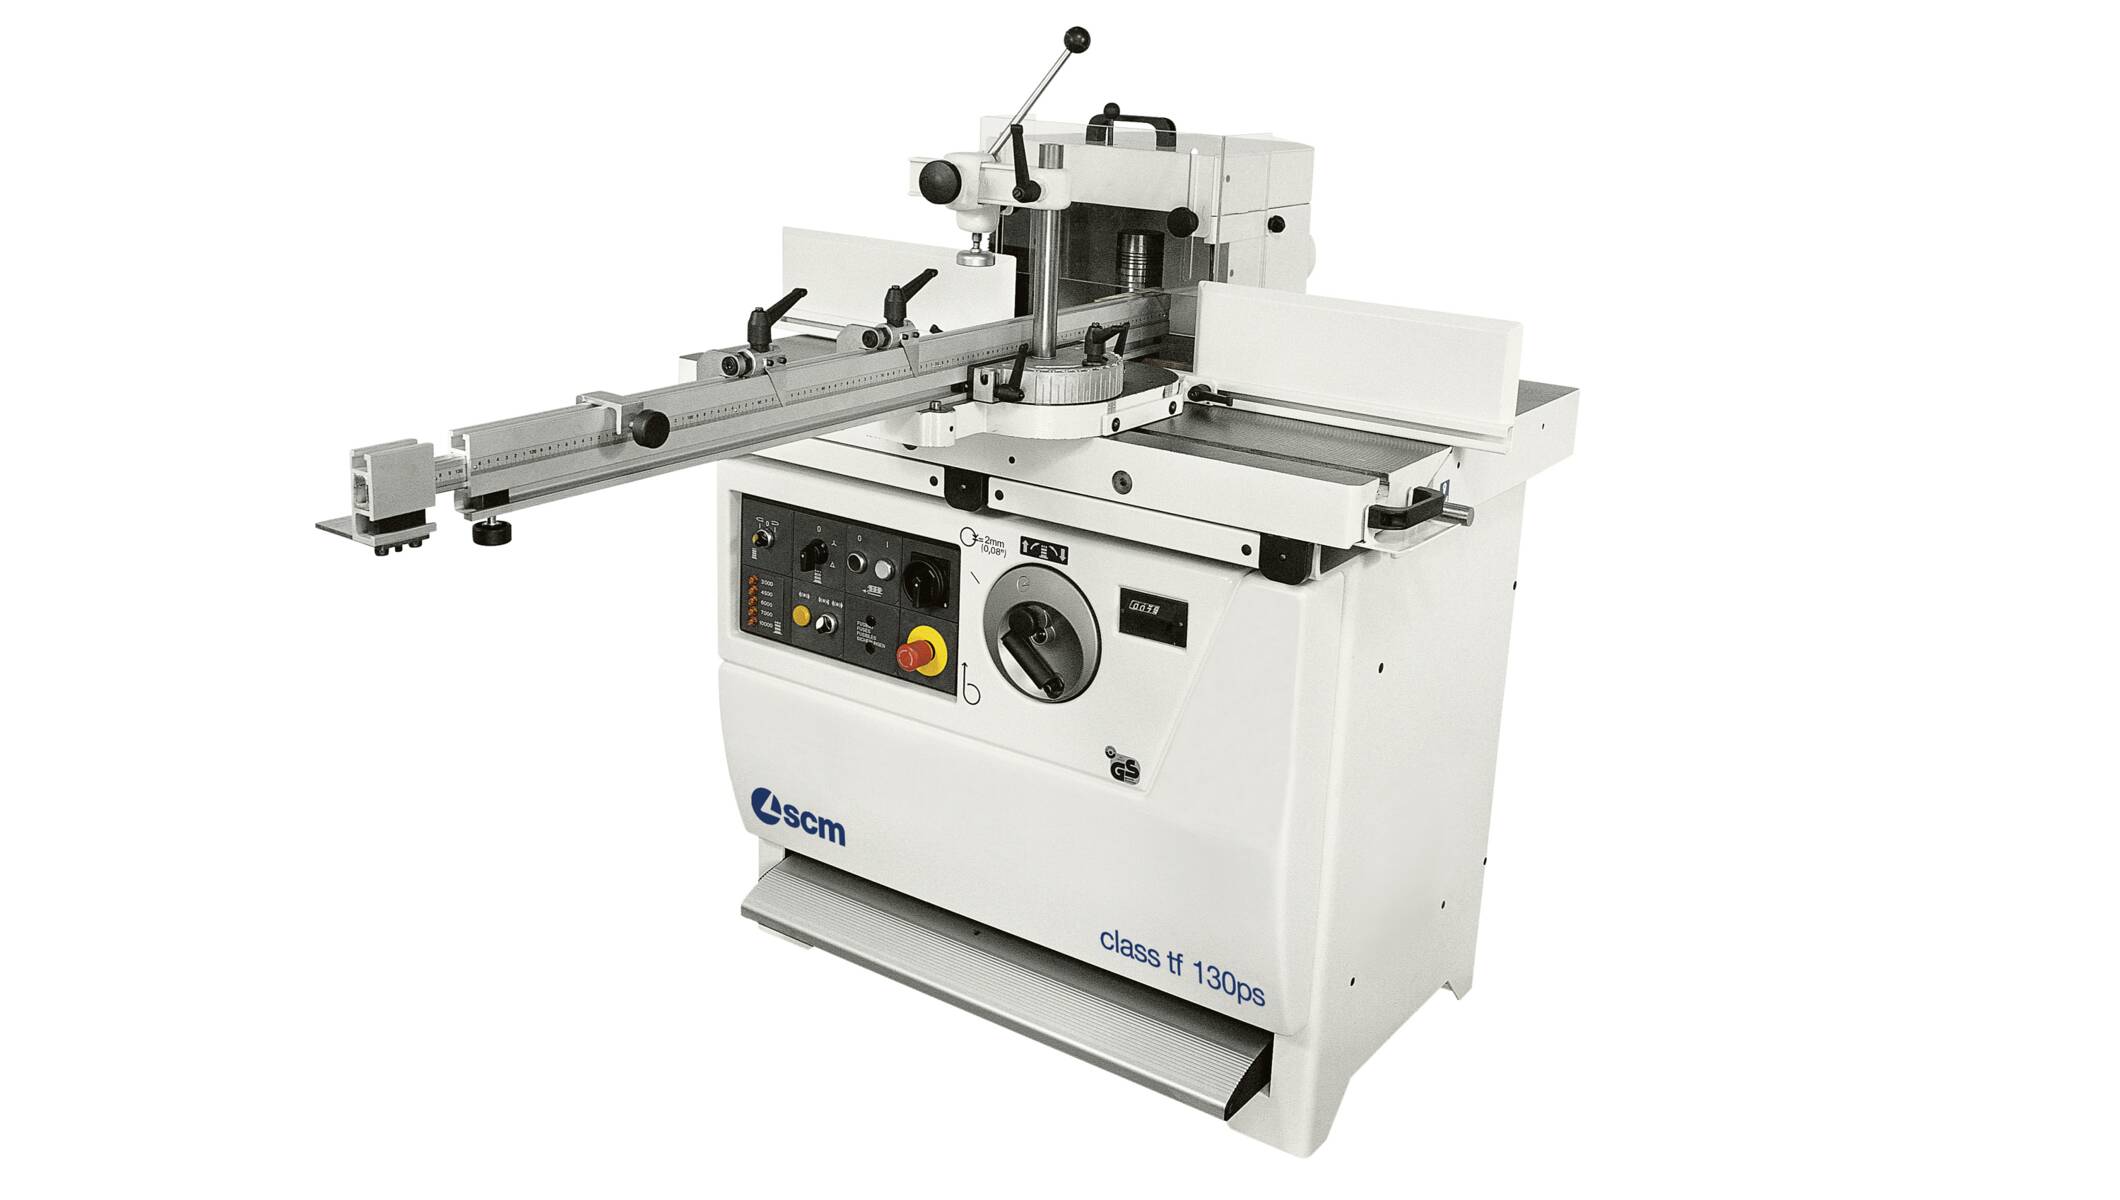 Joinery machines - Shapers - class tf 130ps